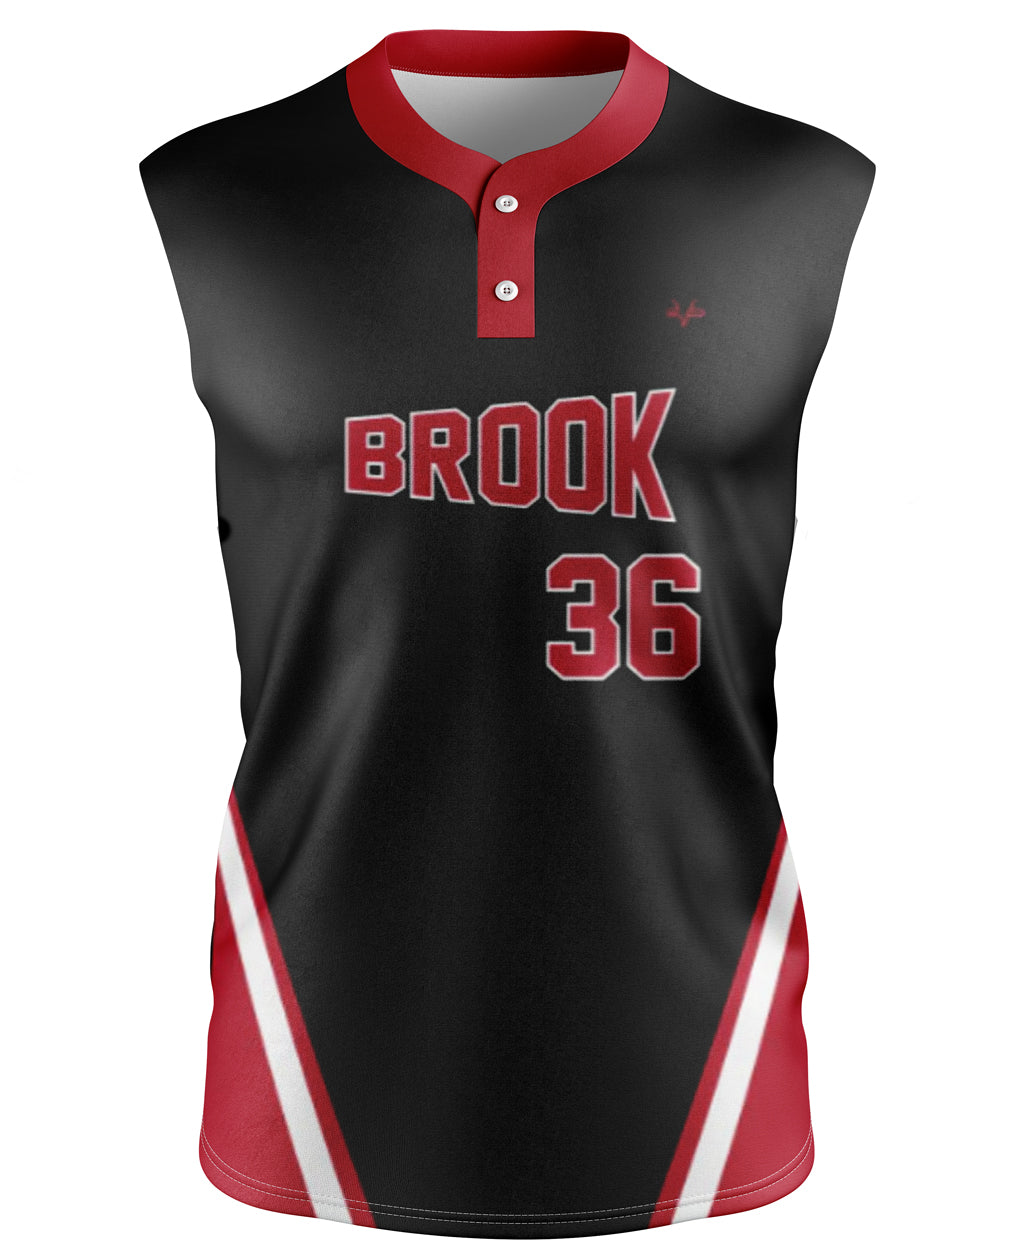 BOUND BROOK REC Sublimated 2-Button Softball Jersey